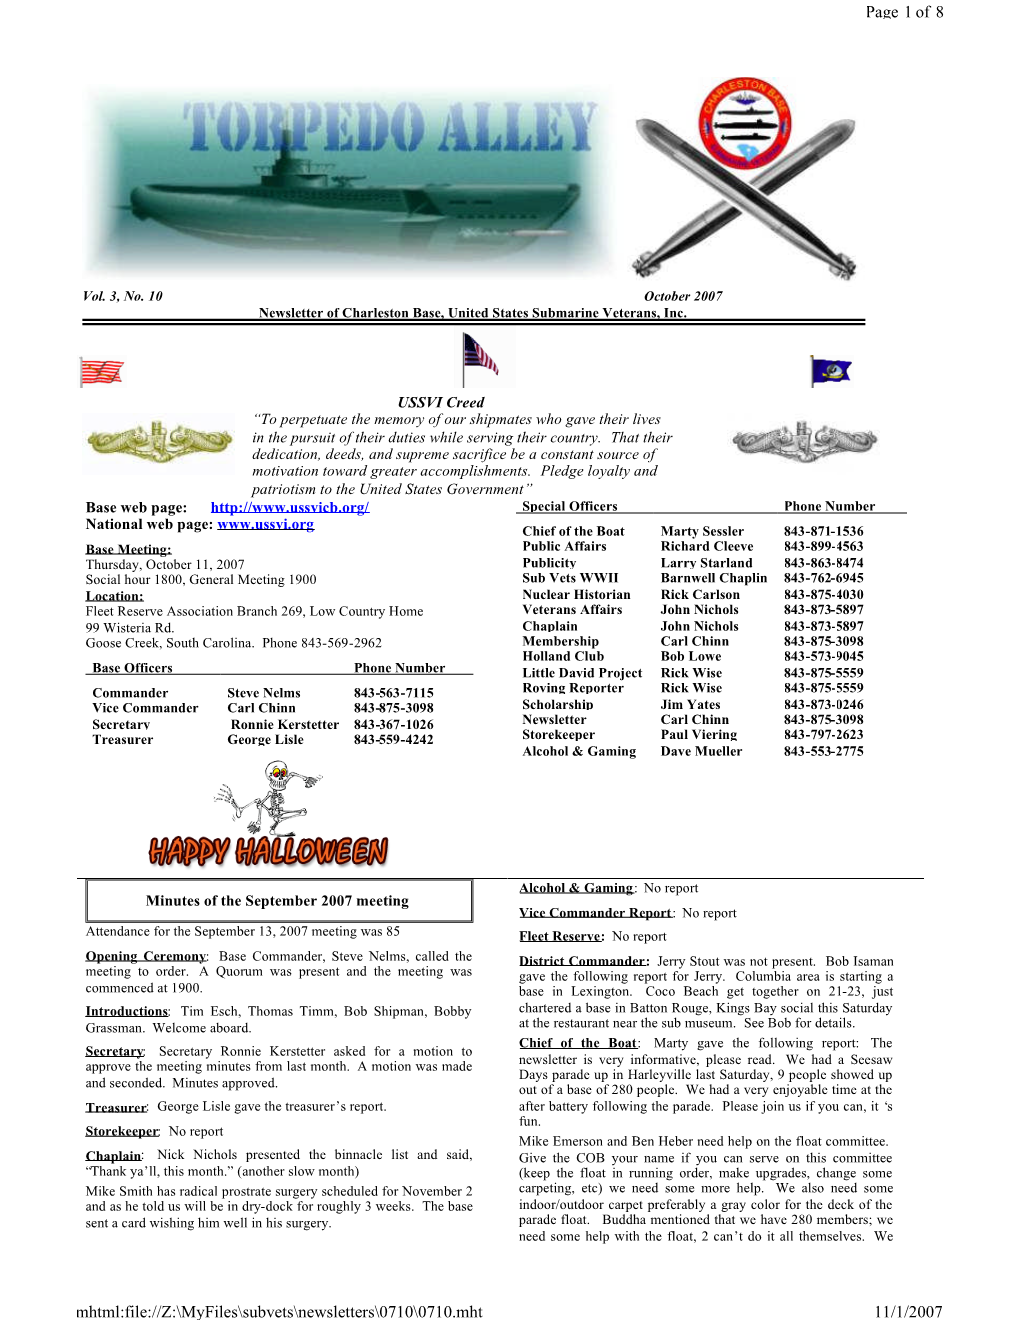 Page 1 of 8 11/1/2007 Mhtml:File://Z:\Myfiles\Subvets\Newsletters